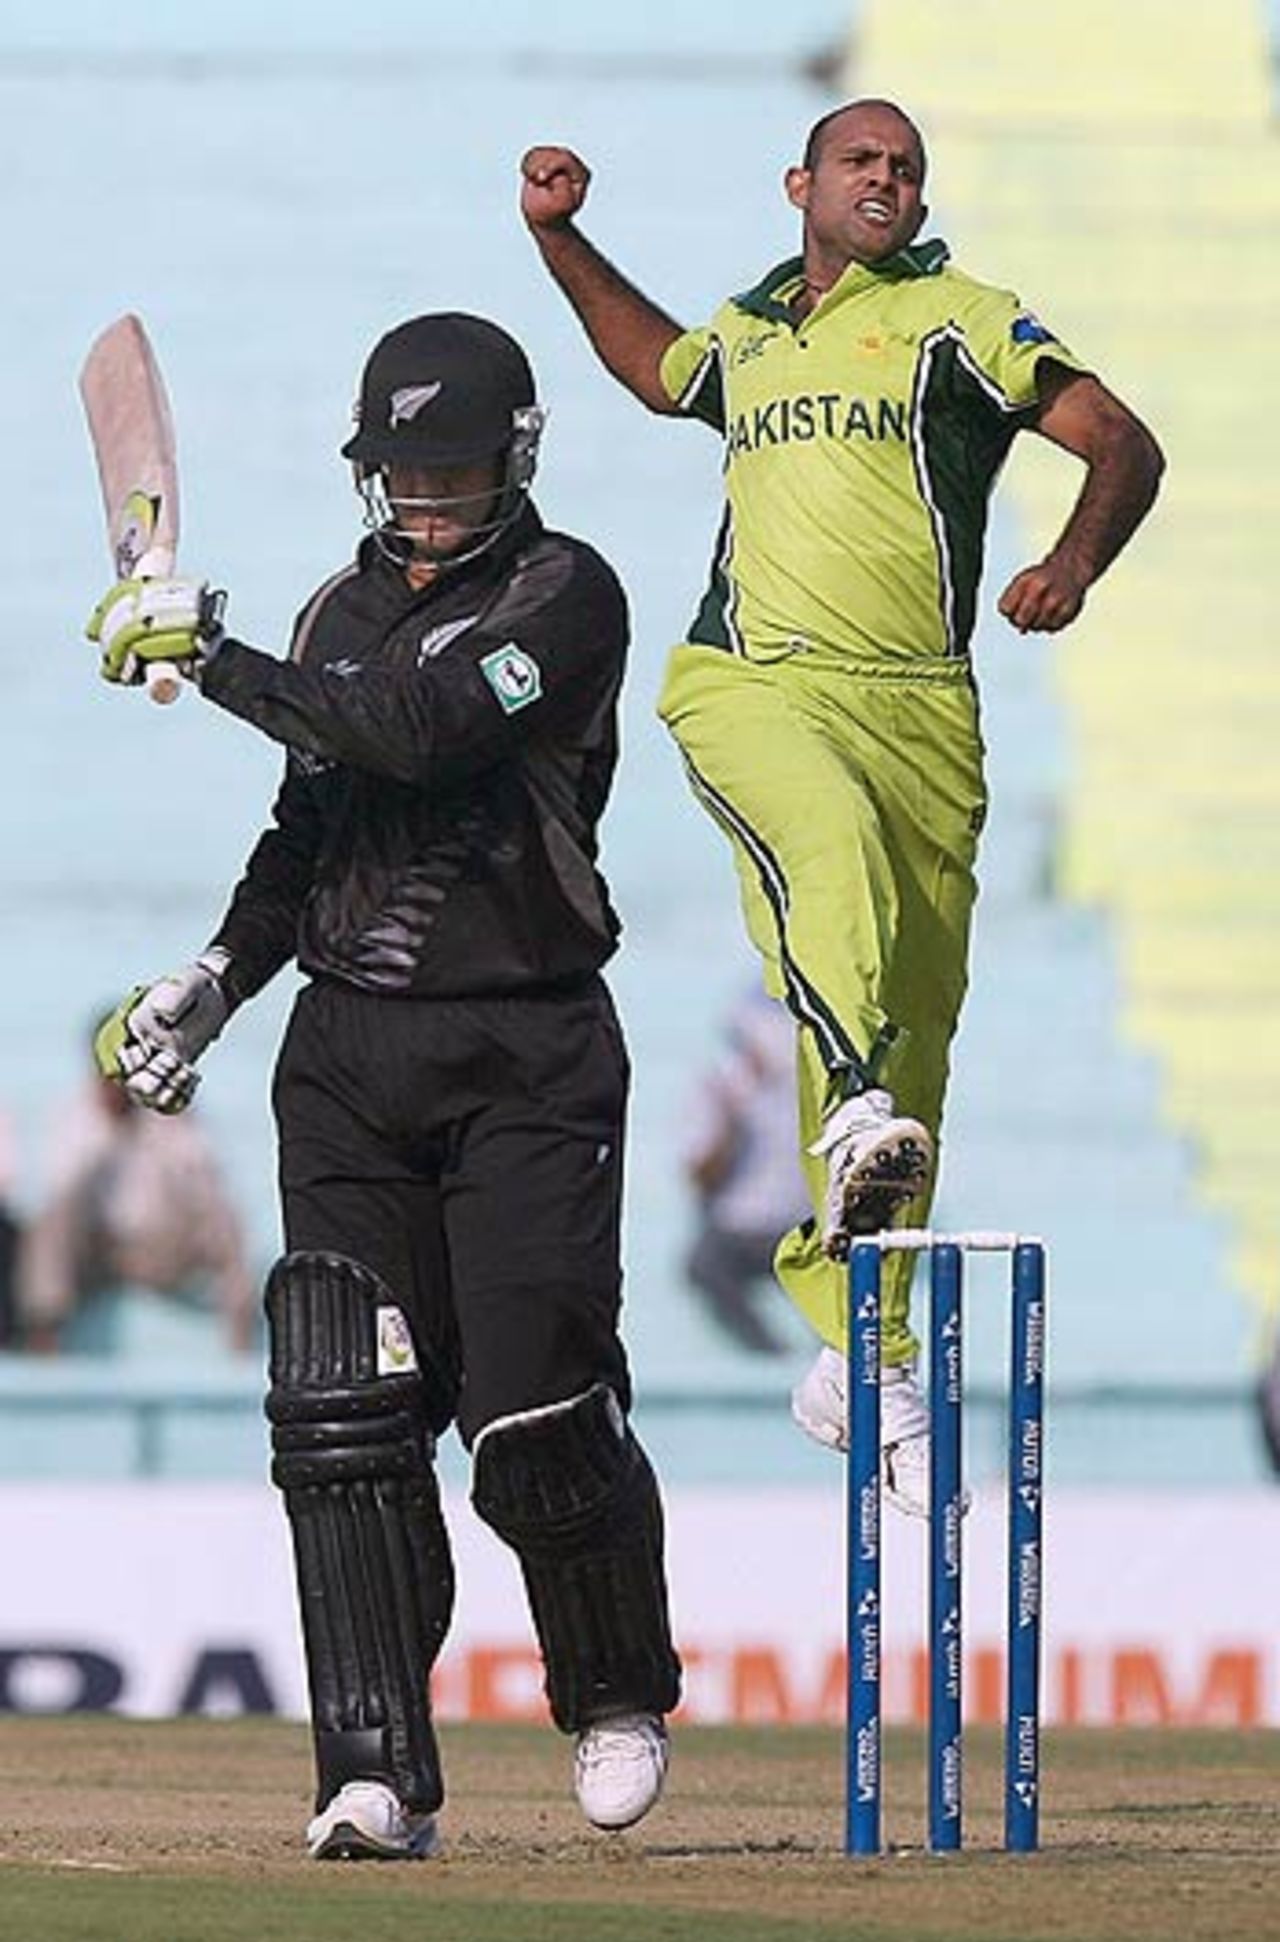 Rana Naved-ul-Hasan sends back Nathan Astle for 15, New Zealand v Pakistan, 8th match, Mohali, Champions Trophy, October 25, 2006